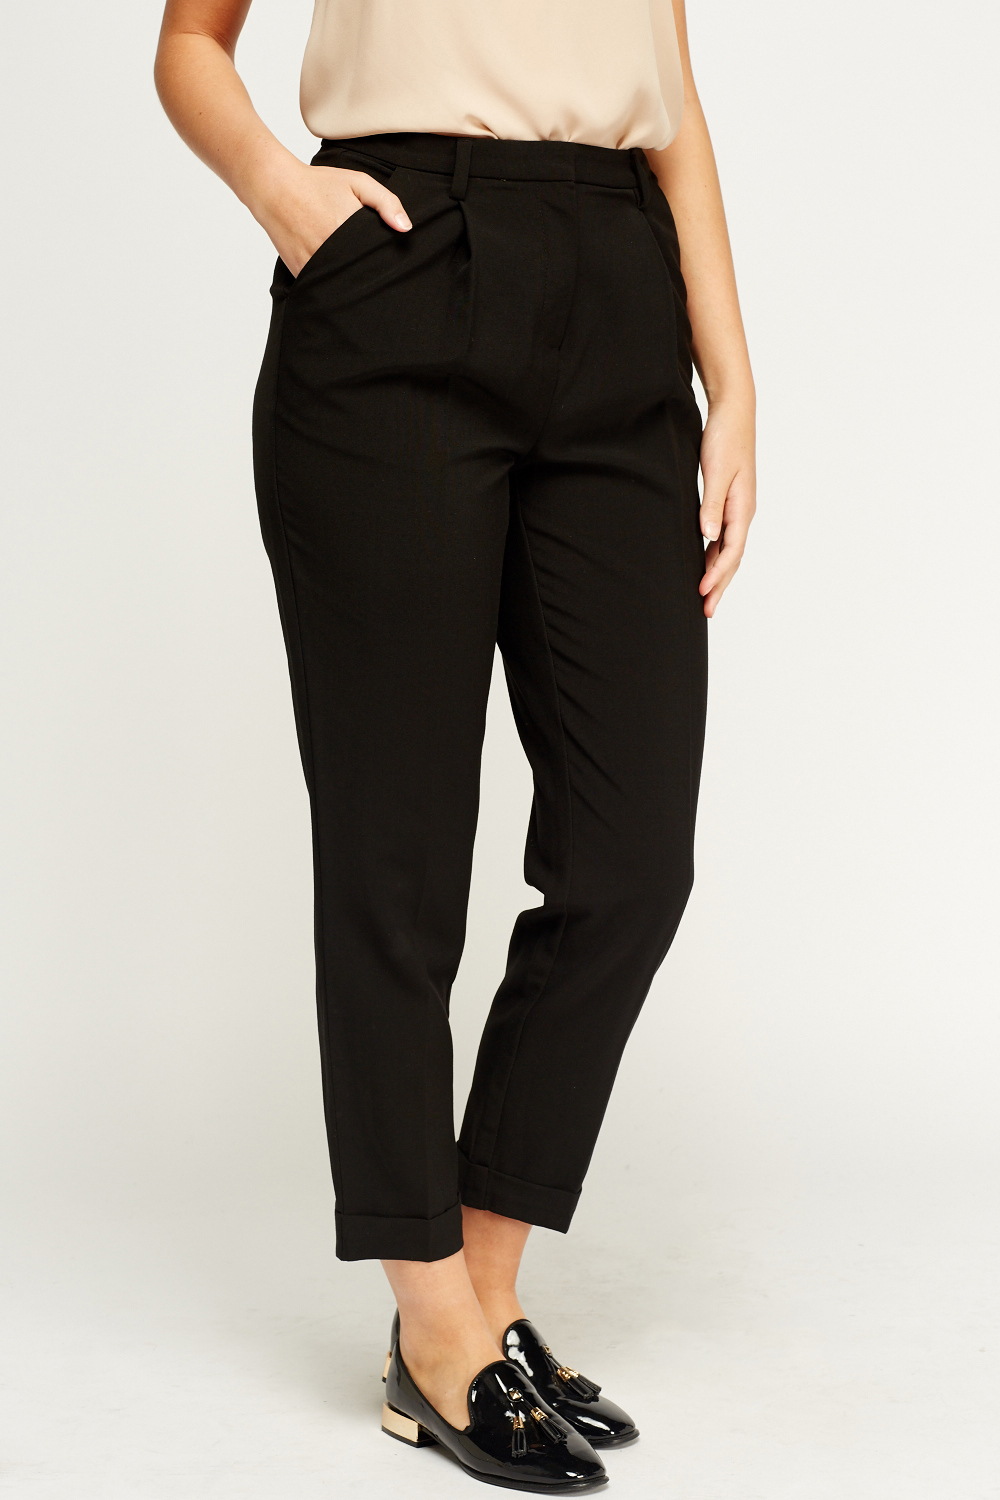 Black Formal Trousers - Just $7